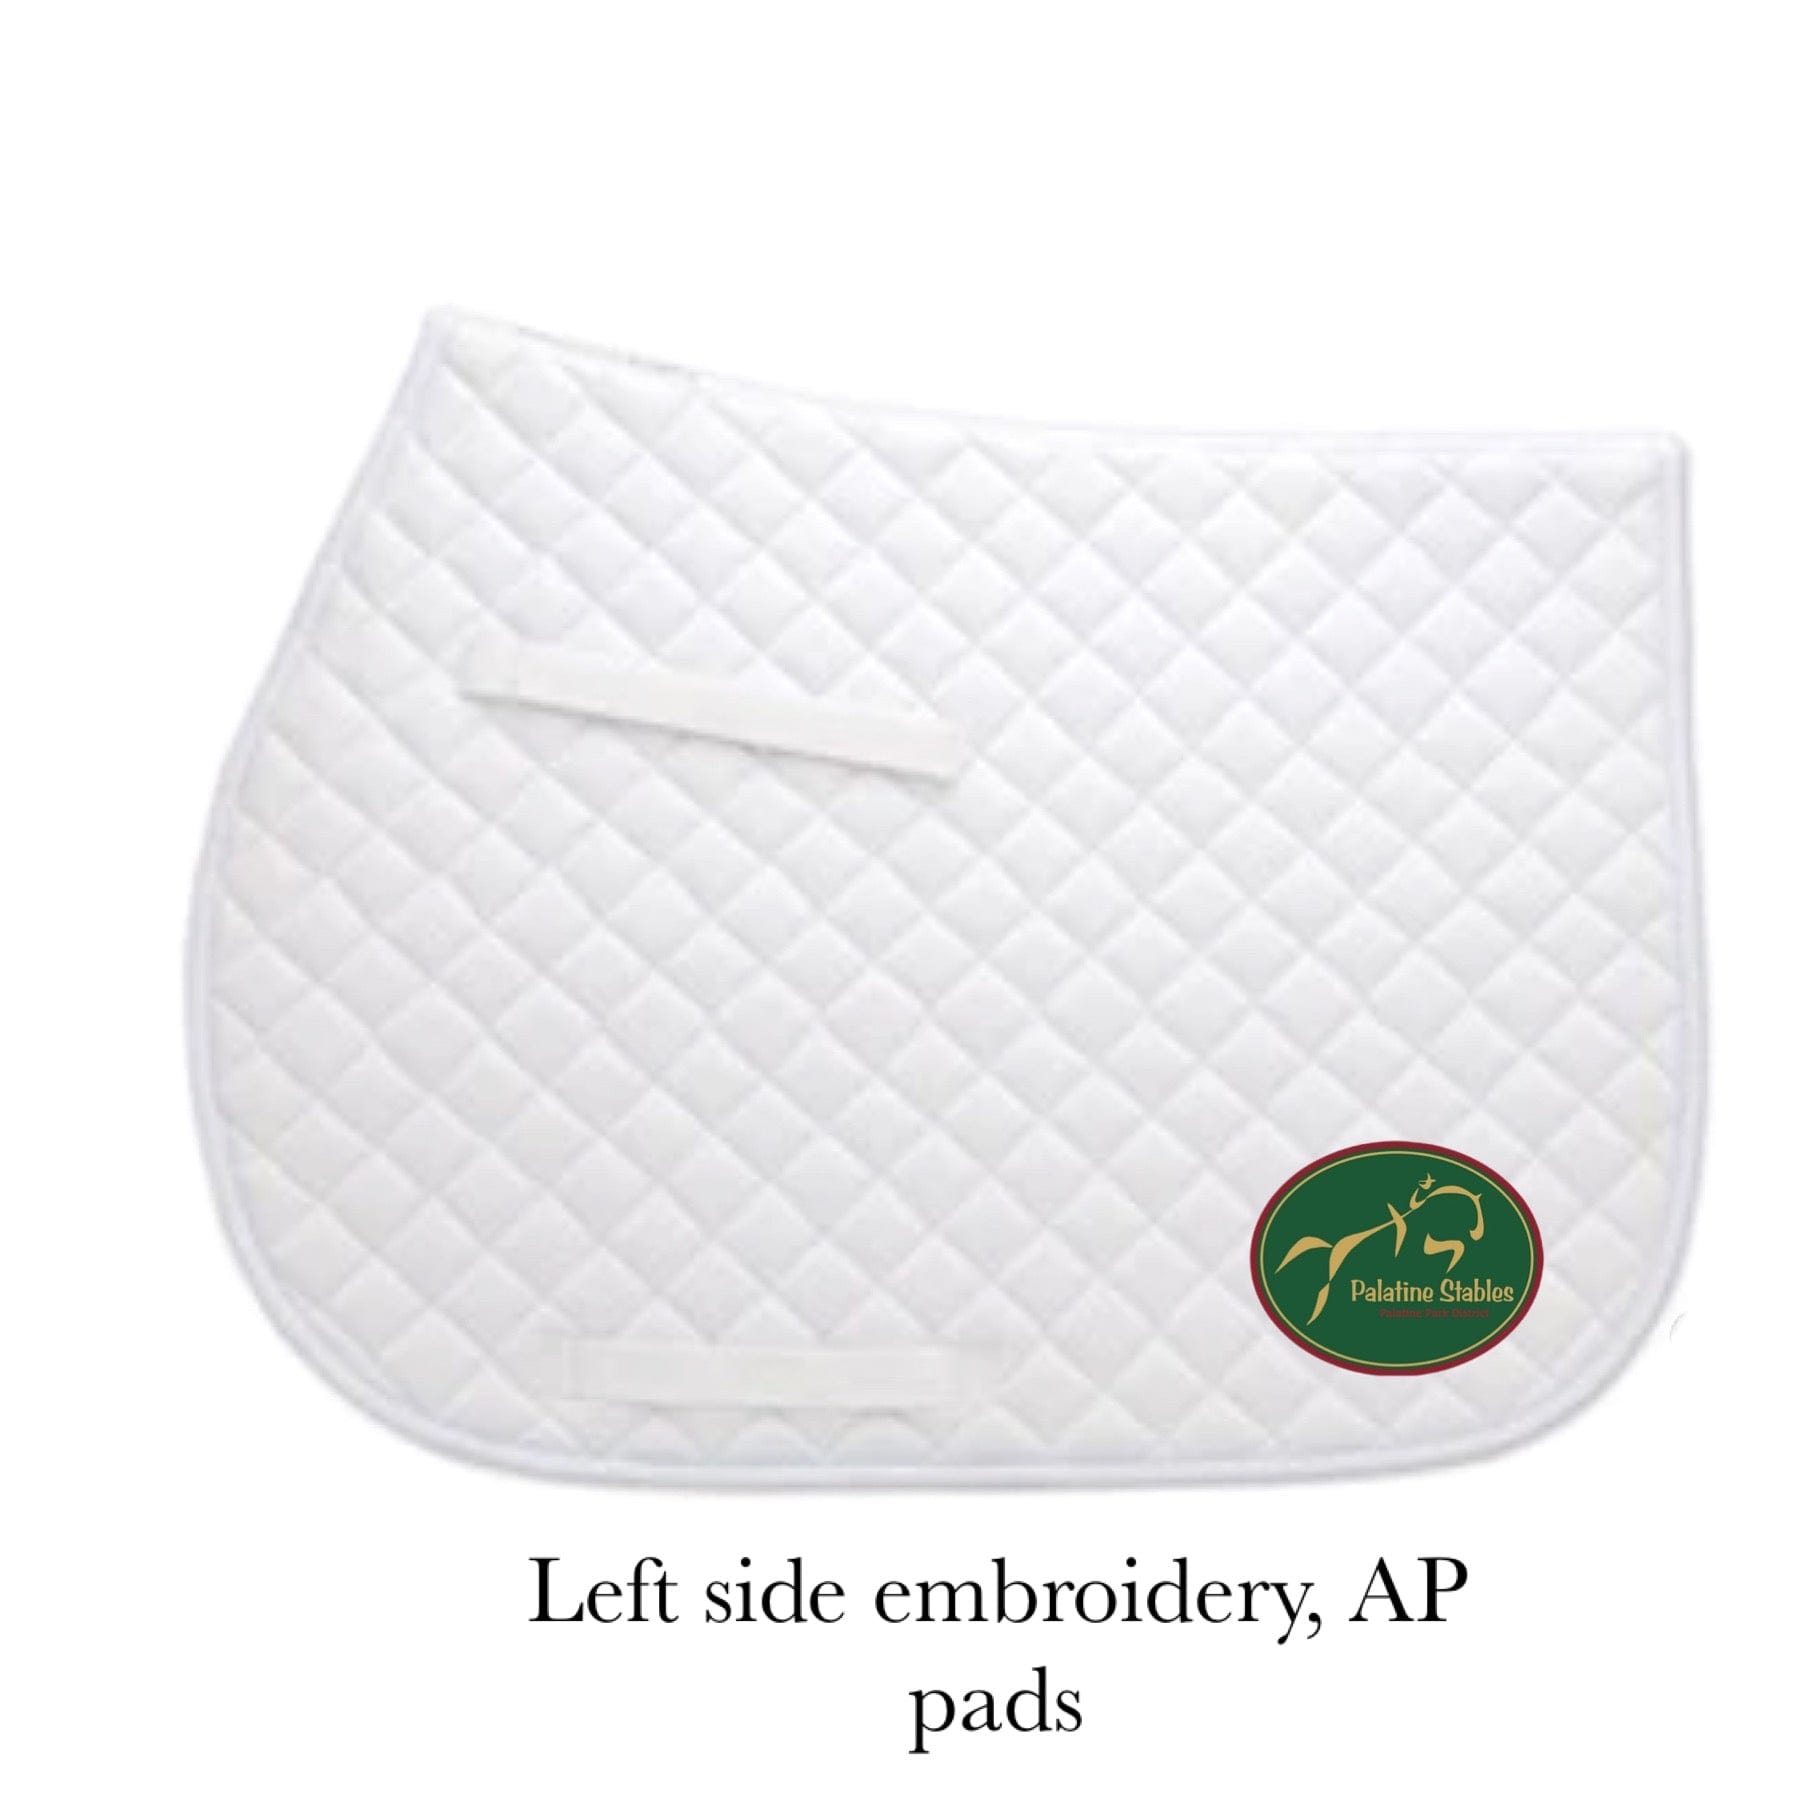 Equestrian Team Apparel Palatine Stables Saddle Pad equestrian team apparel online tack store mobile tack store custom farm apparel custom show stable clothing equestrian lifestyle horse show clothing riding clothes horses equestrian tack store